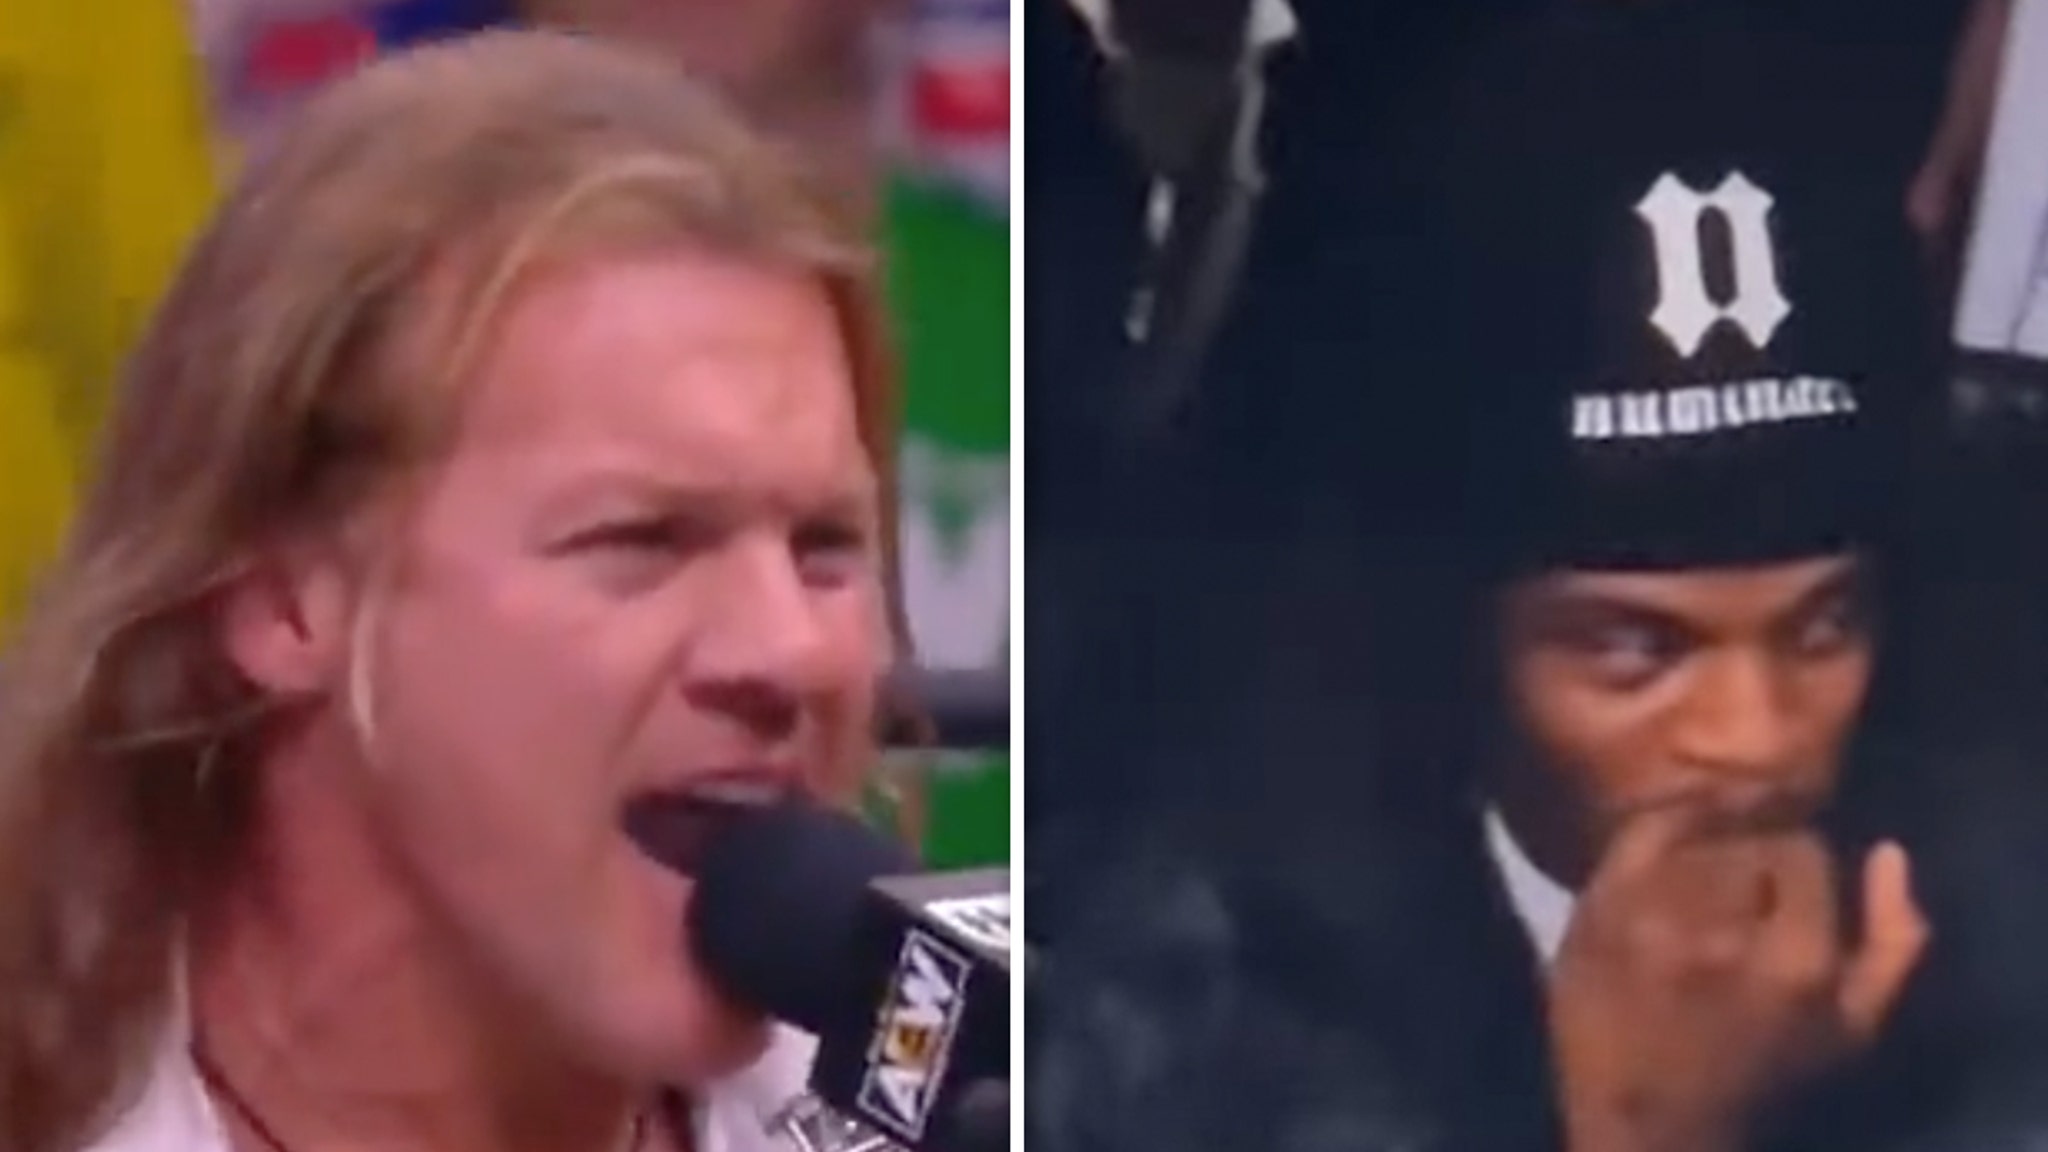 Chris Jericho Calls Out Lamar Jackson At AEW Event, I'll Whoop Your Ass!